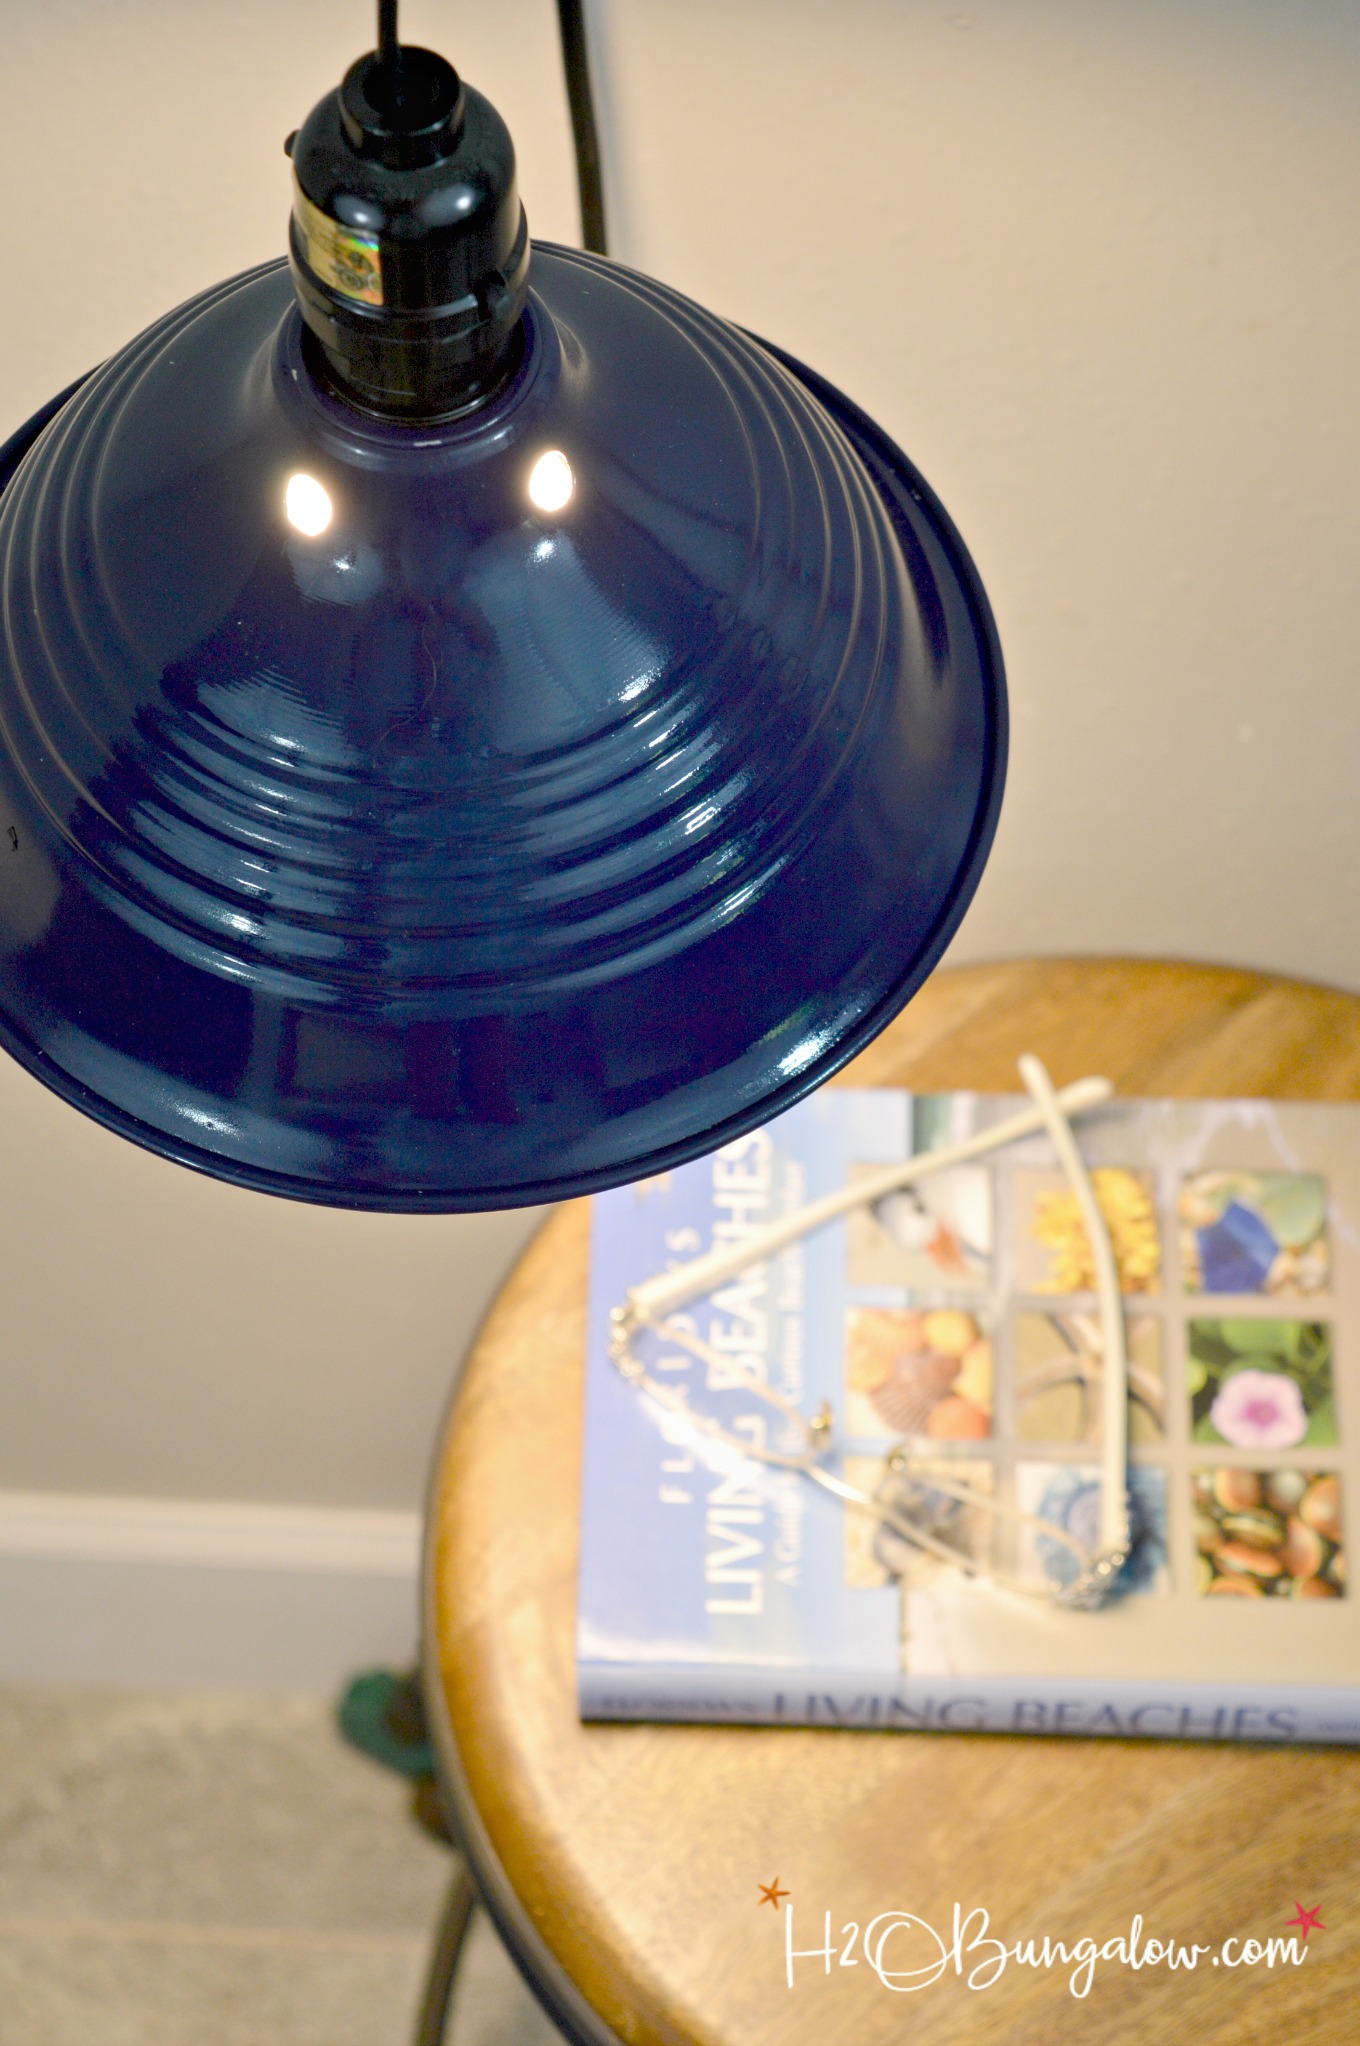  Use this wall sconce tutorial DIY vintage style pulley light to make a fabulous home decor piece for under $15! Looks just like an upscale store version.